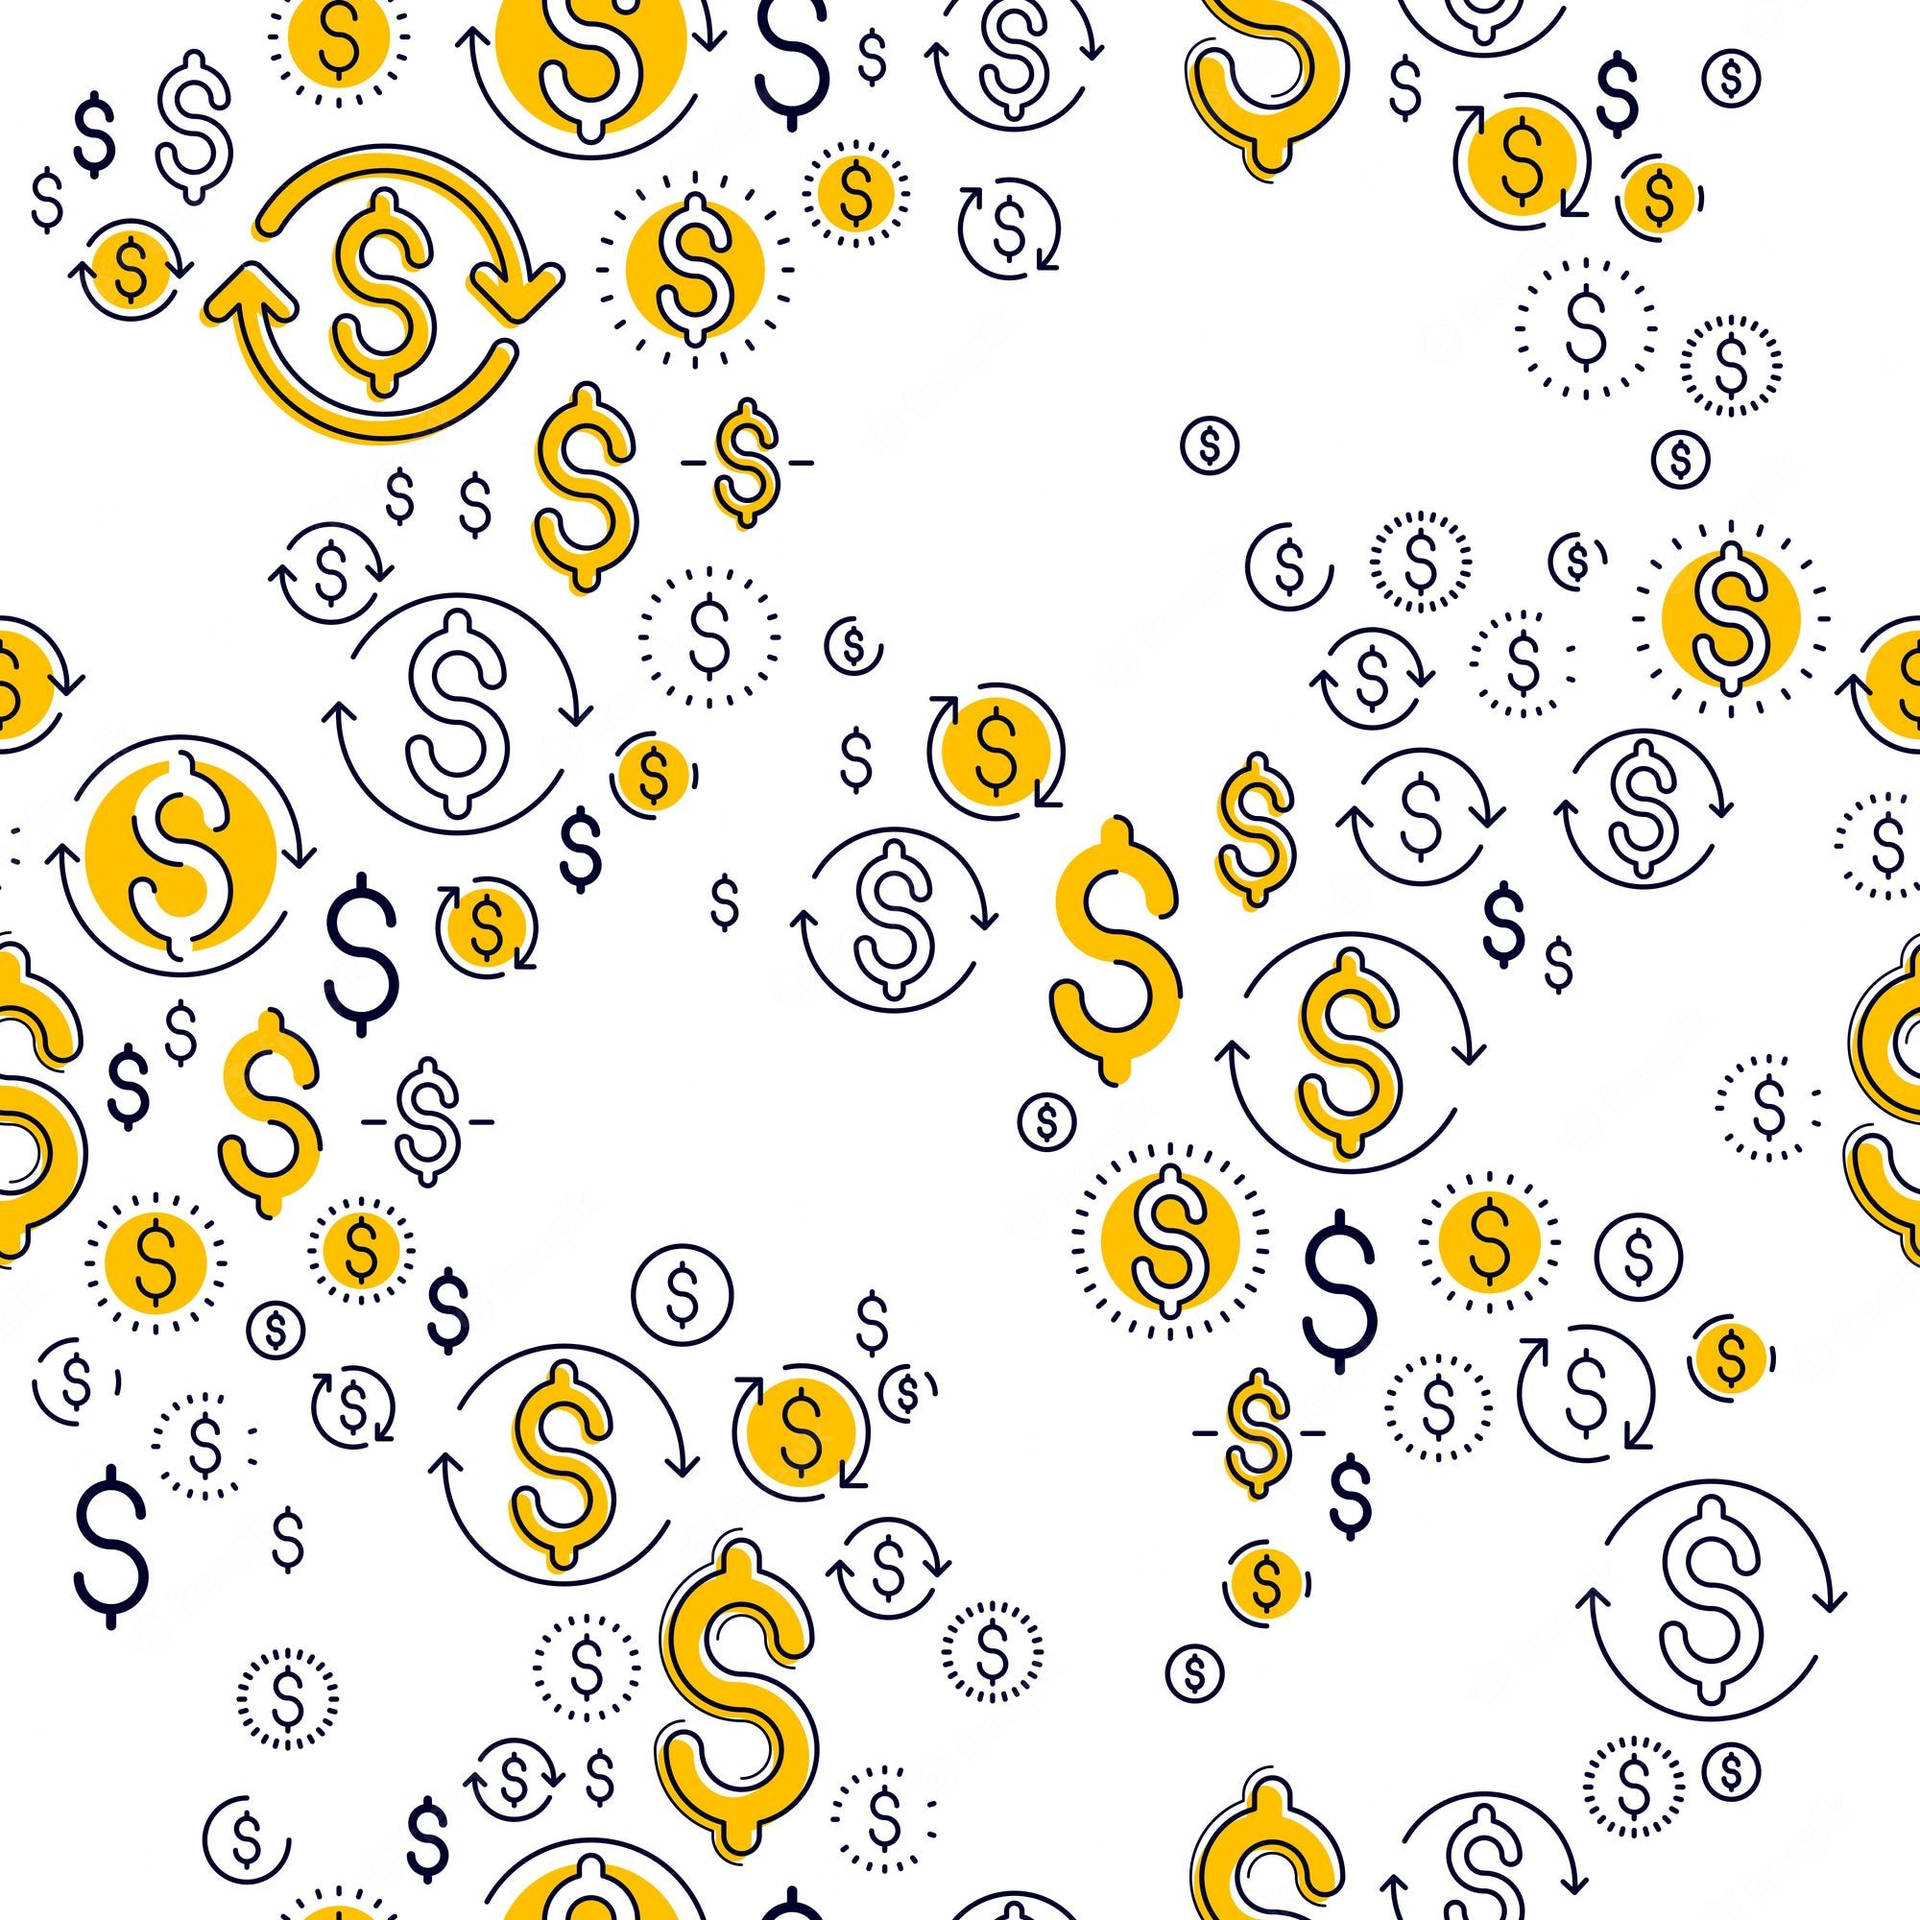 Dollar Signs On A White Background Wallpaper